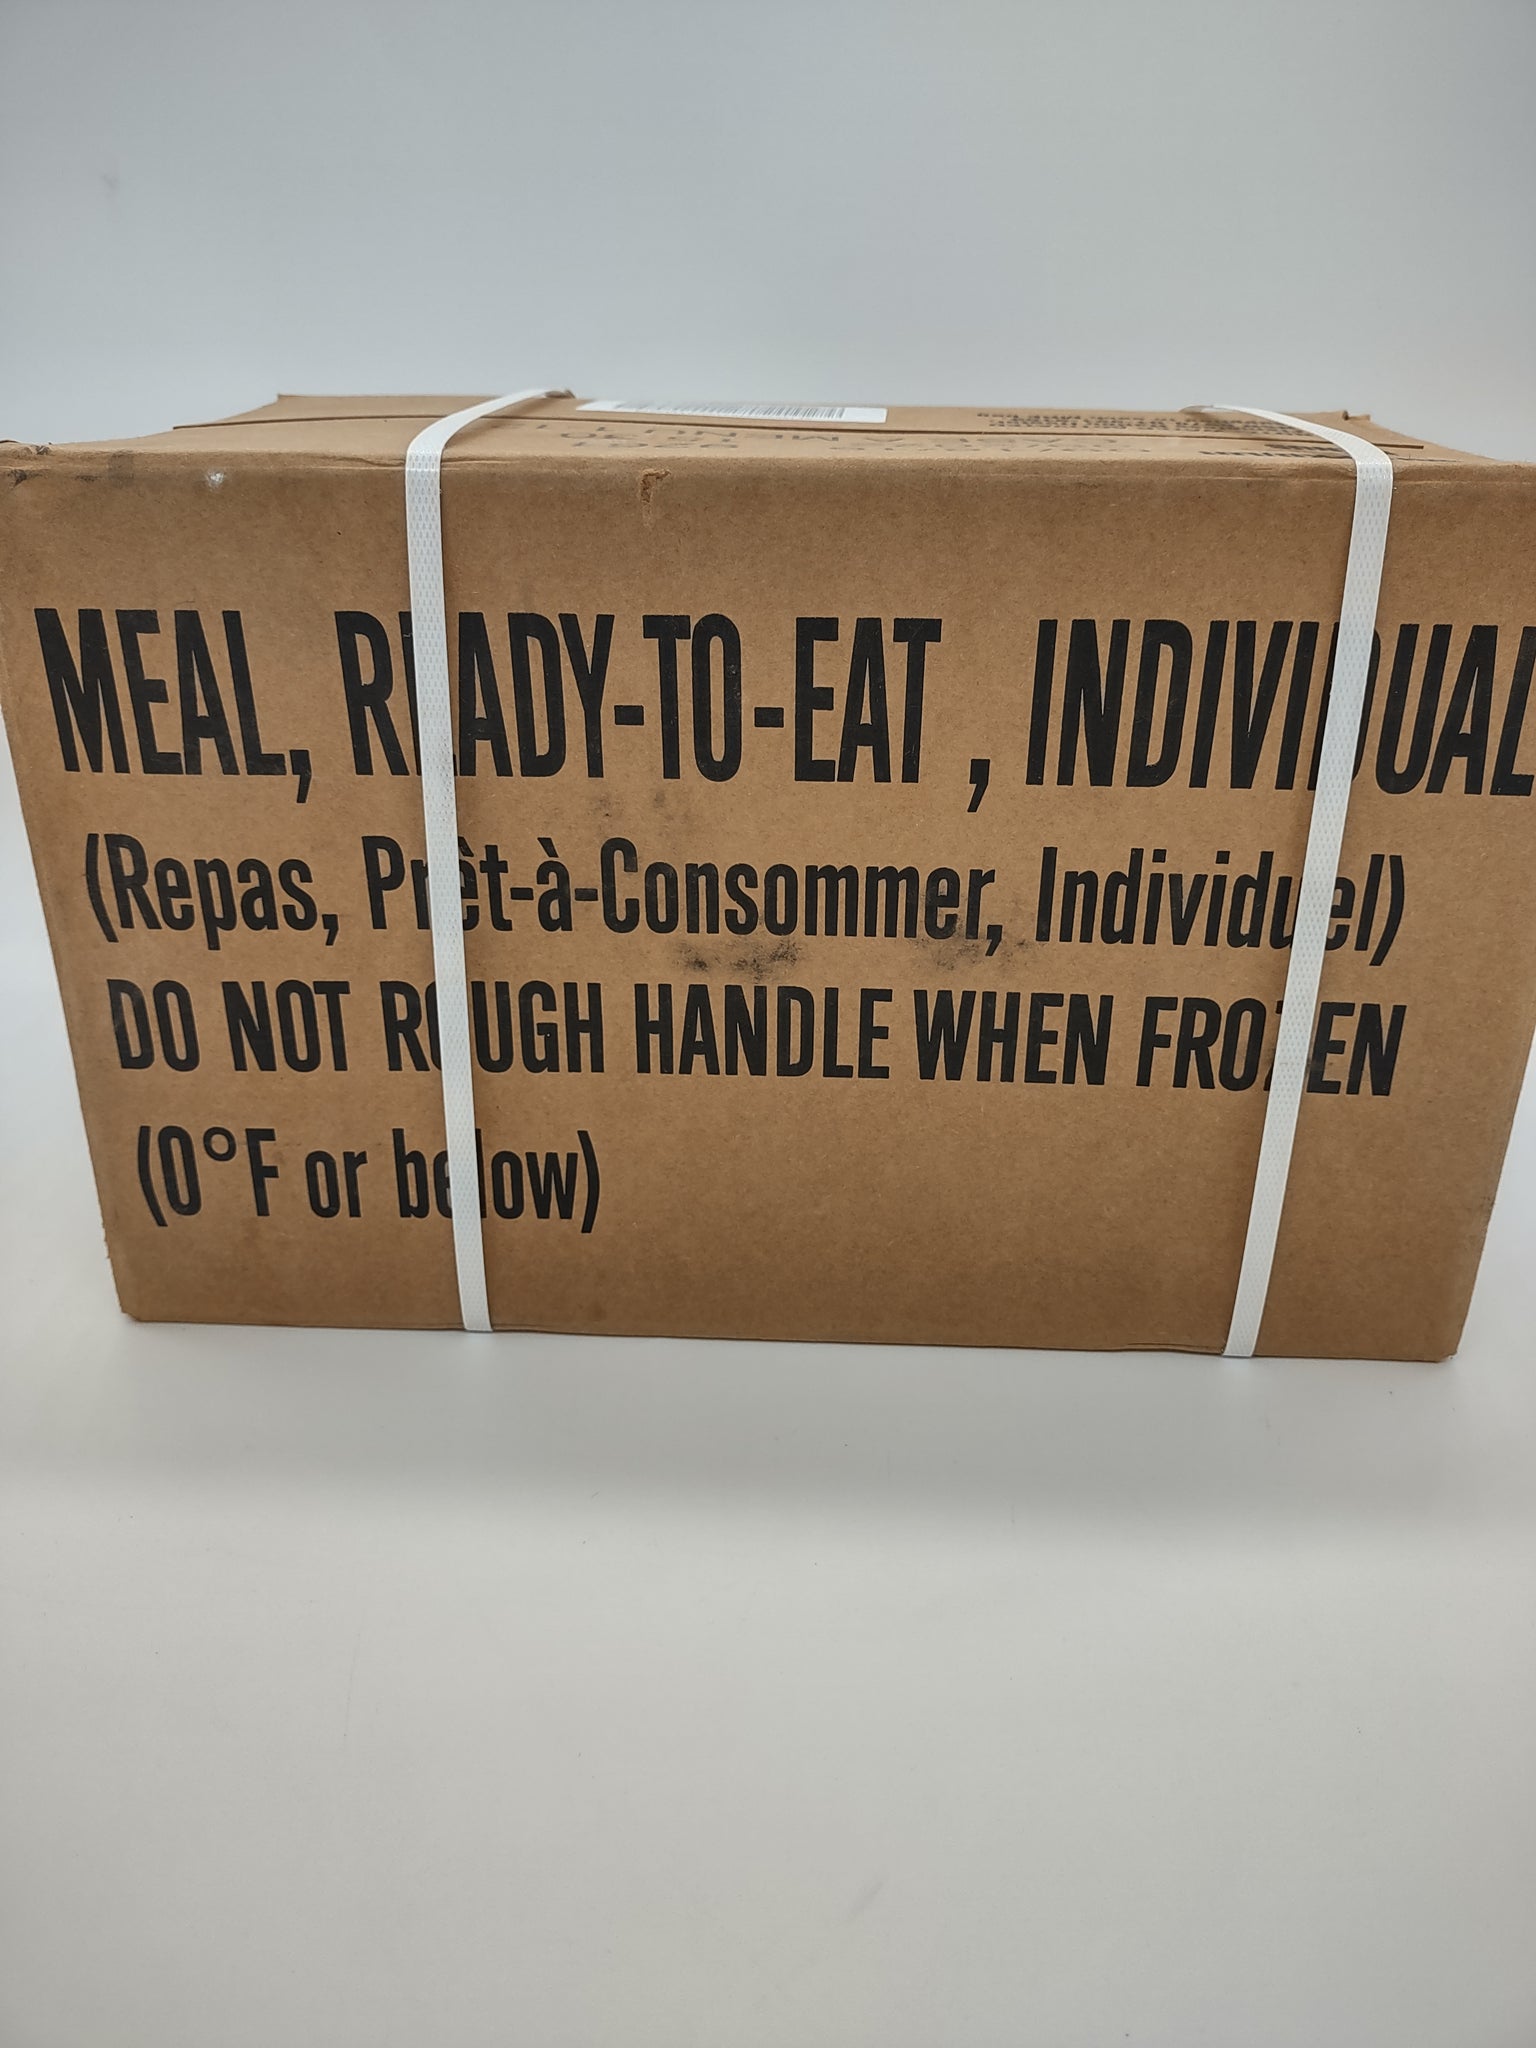 Military Issue MRE Meals Ready to Eat Menu B Case of 12 – Ma Deuce Trading  Post